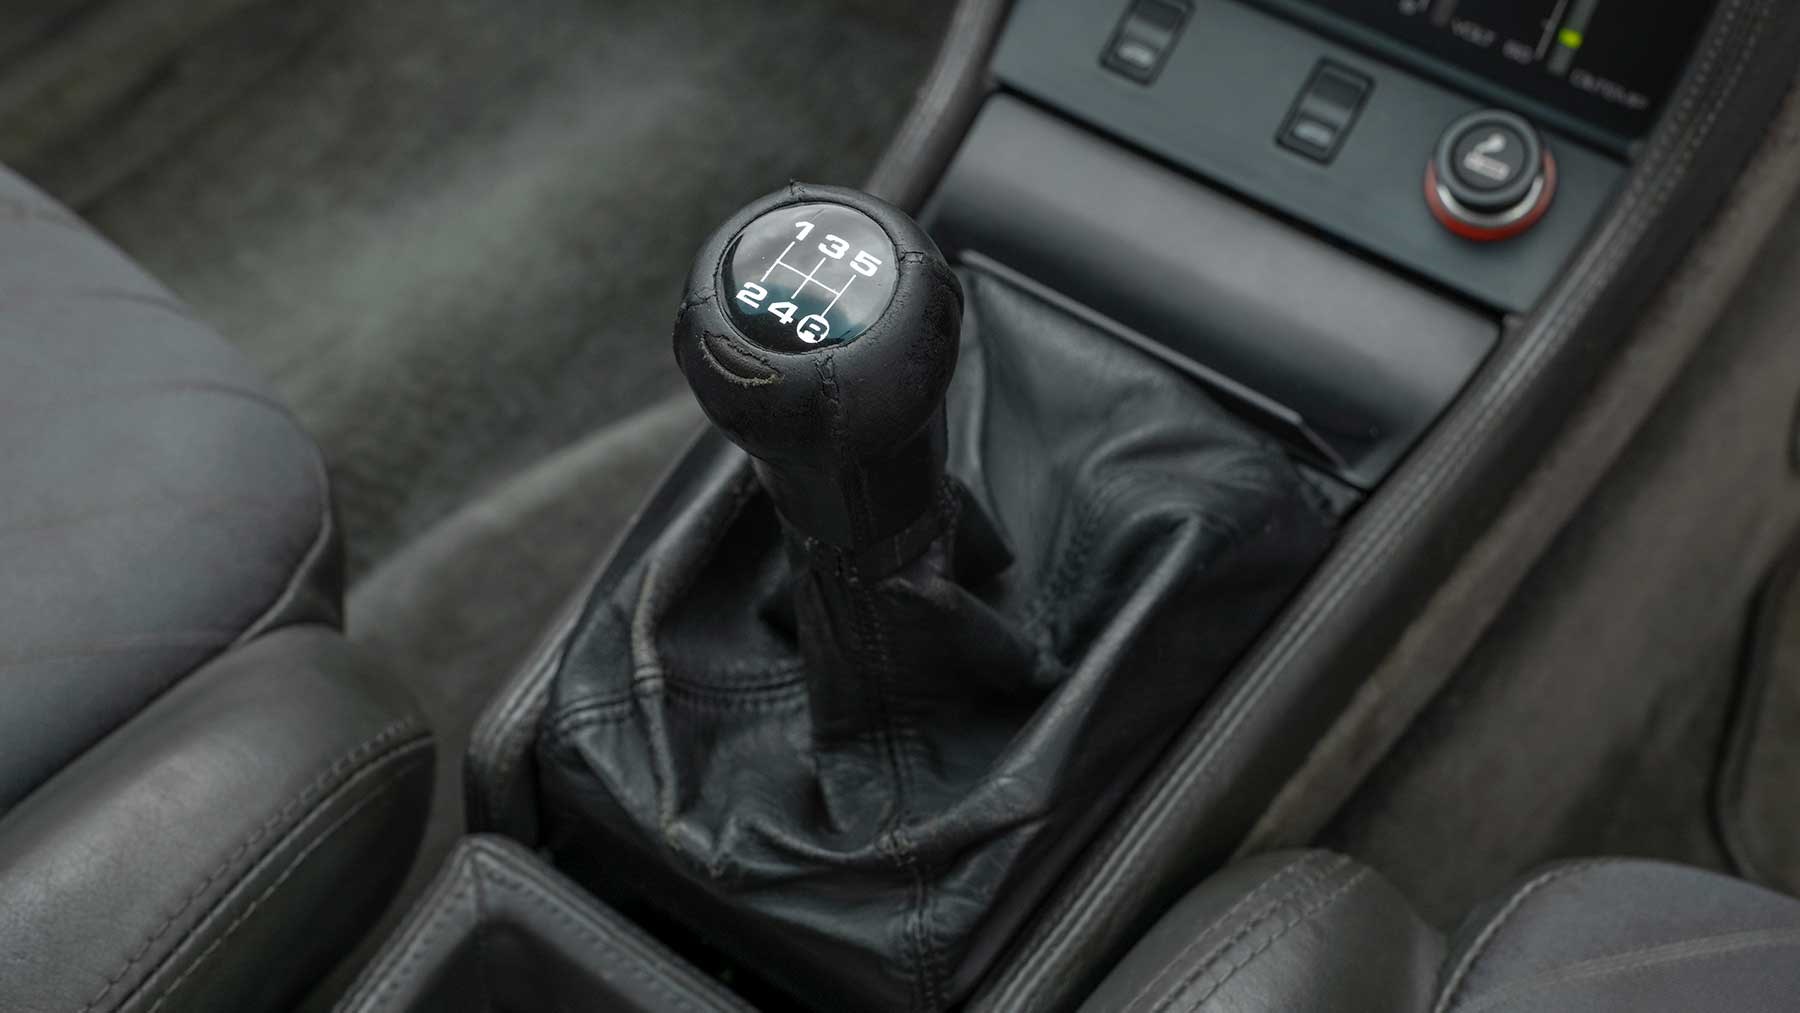 Simple, deliberate action for Audi Quattro five-speed gearbox